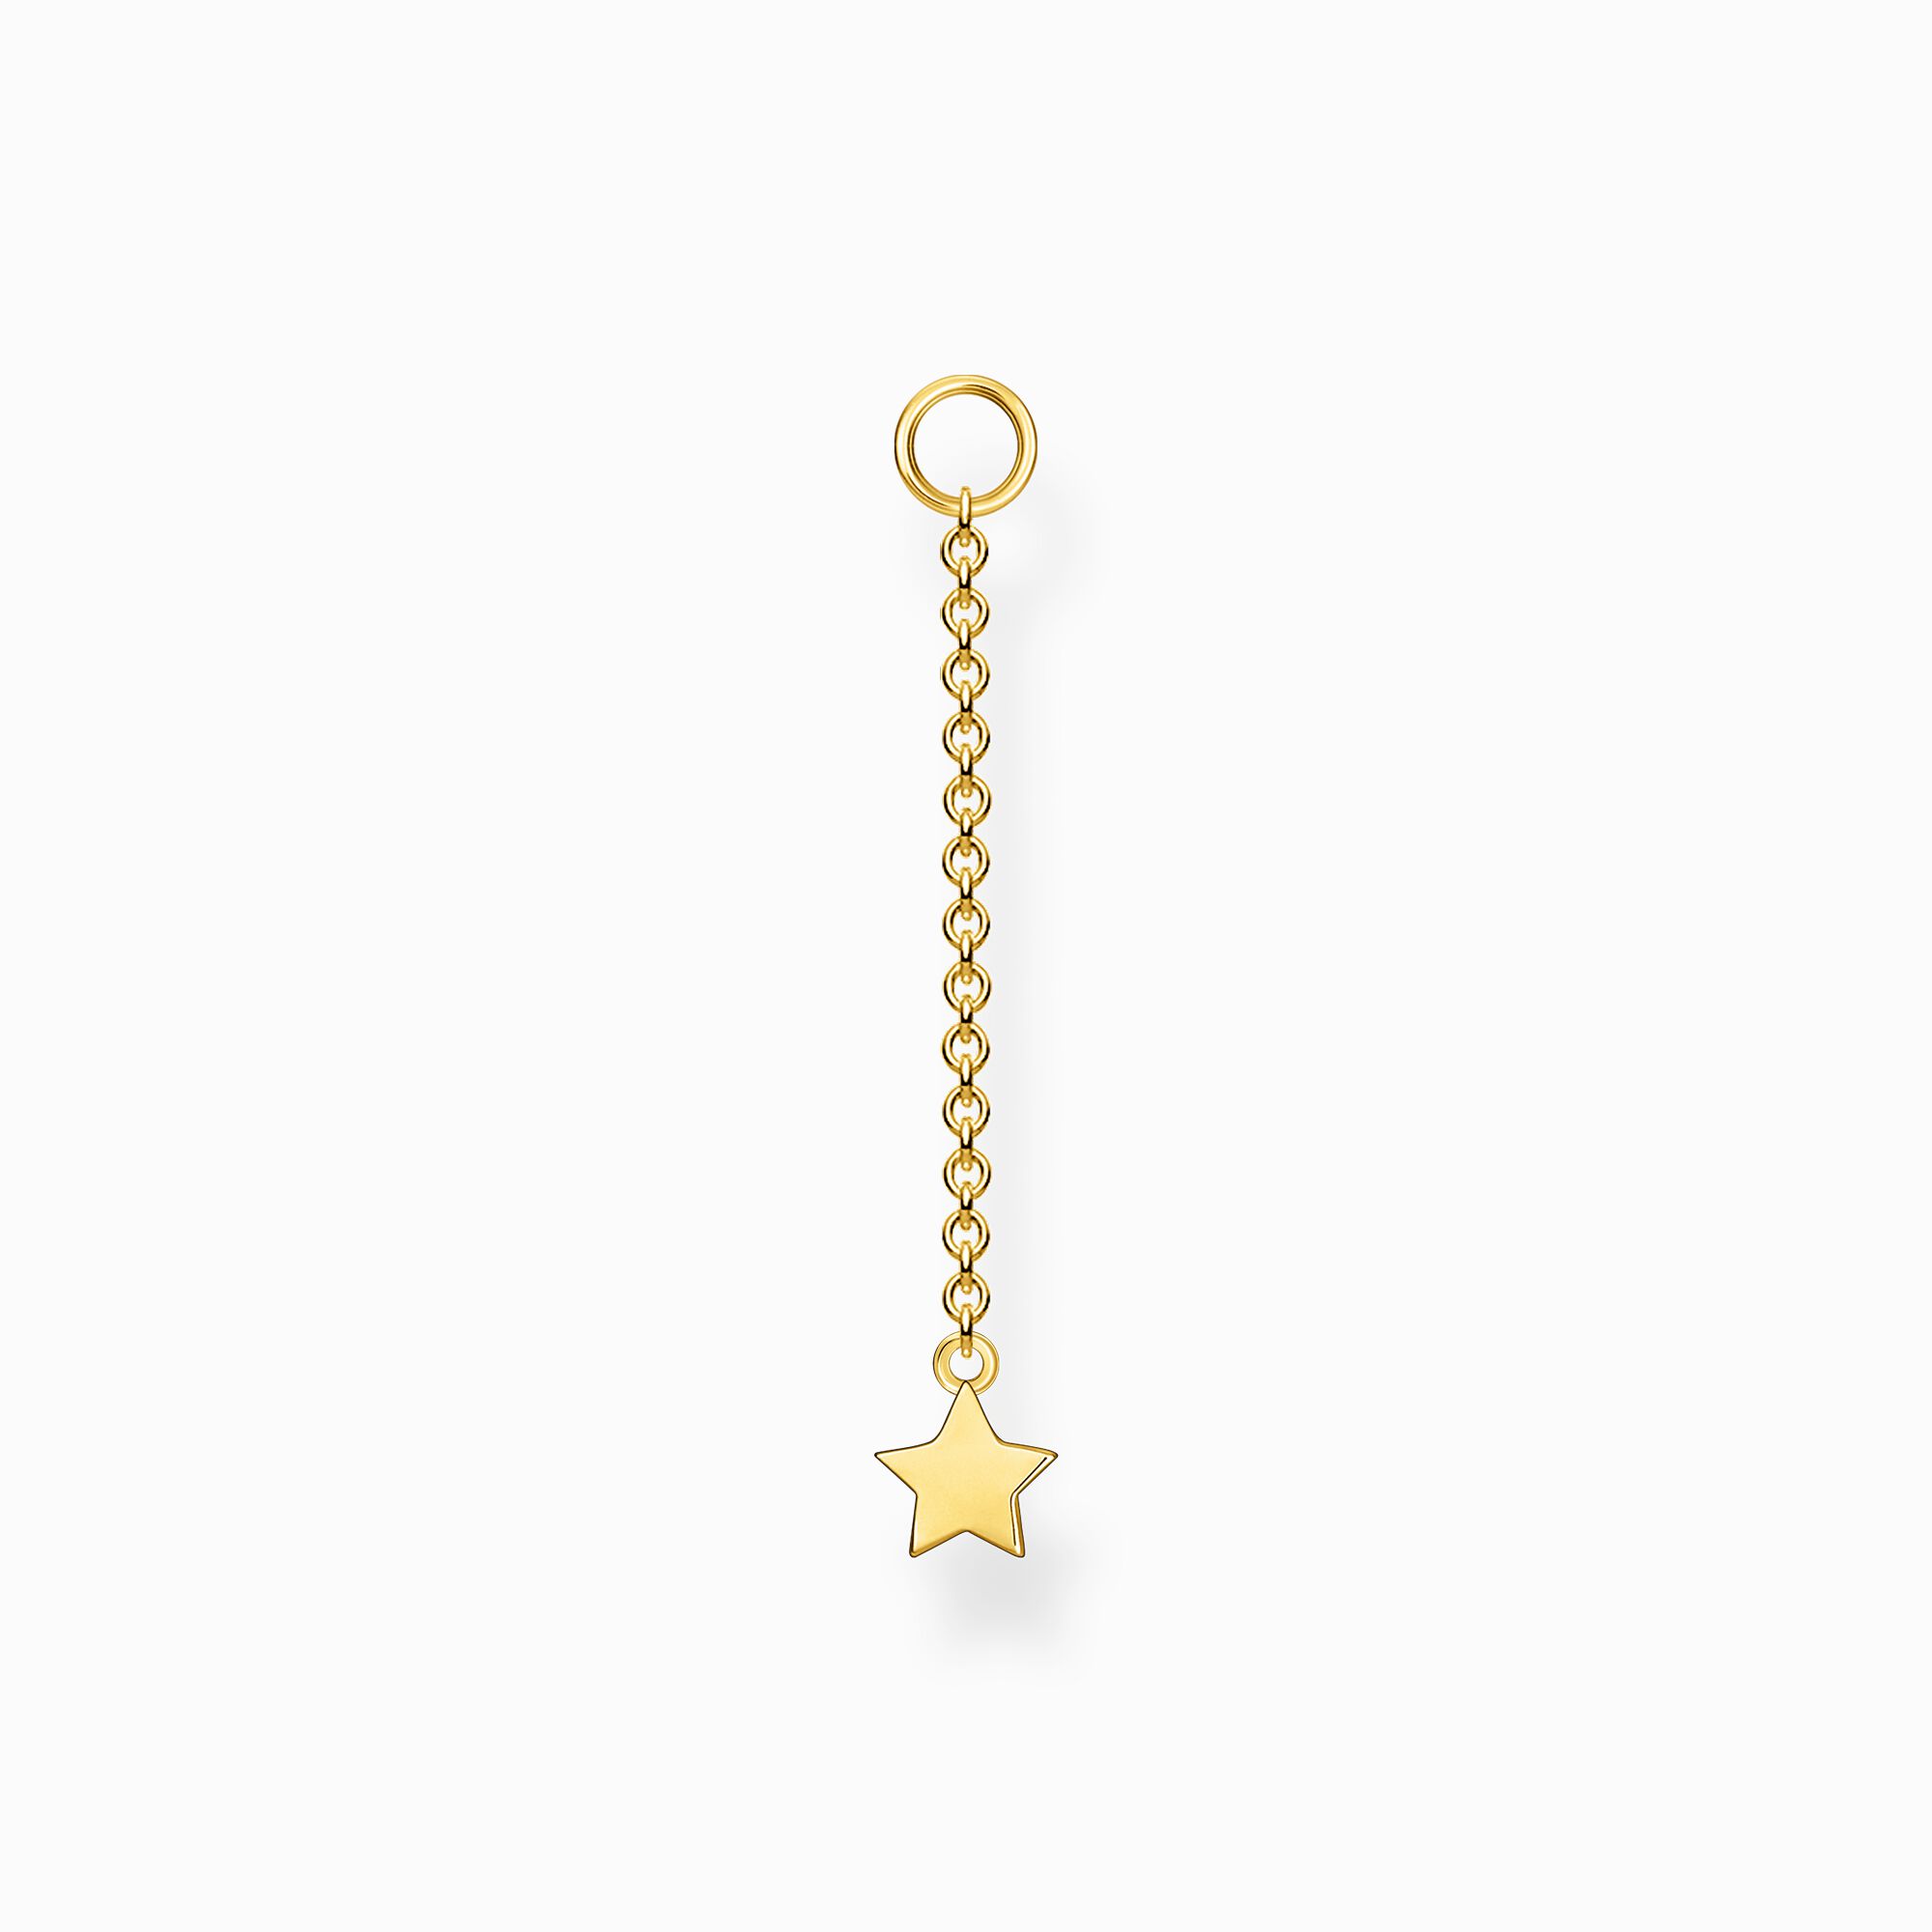 Golden earring pendant with chain – THOMAS SABO